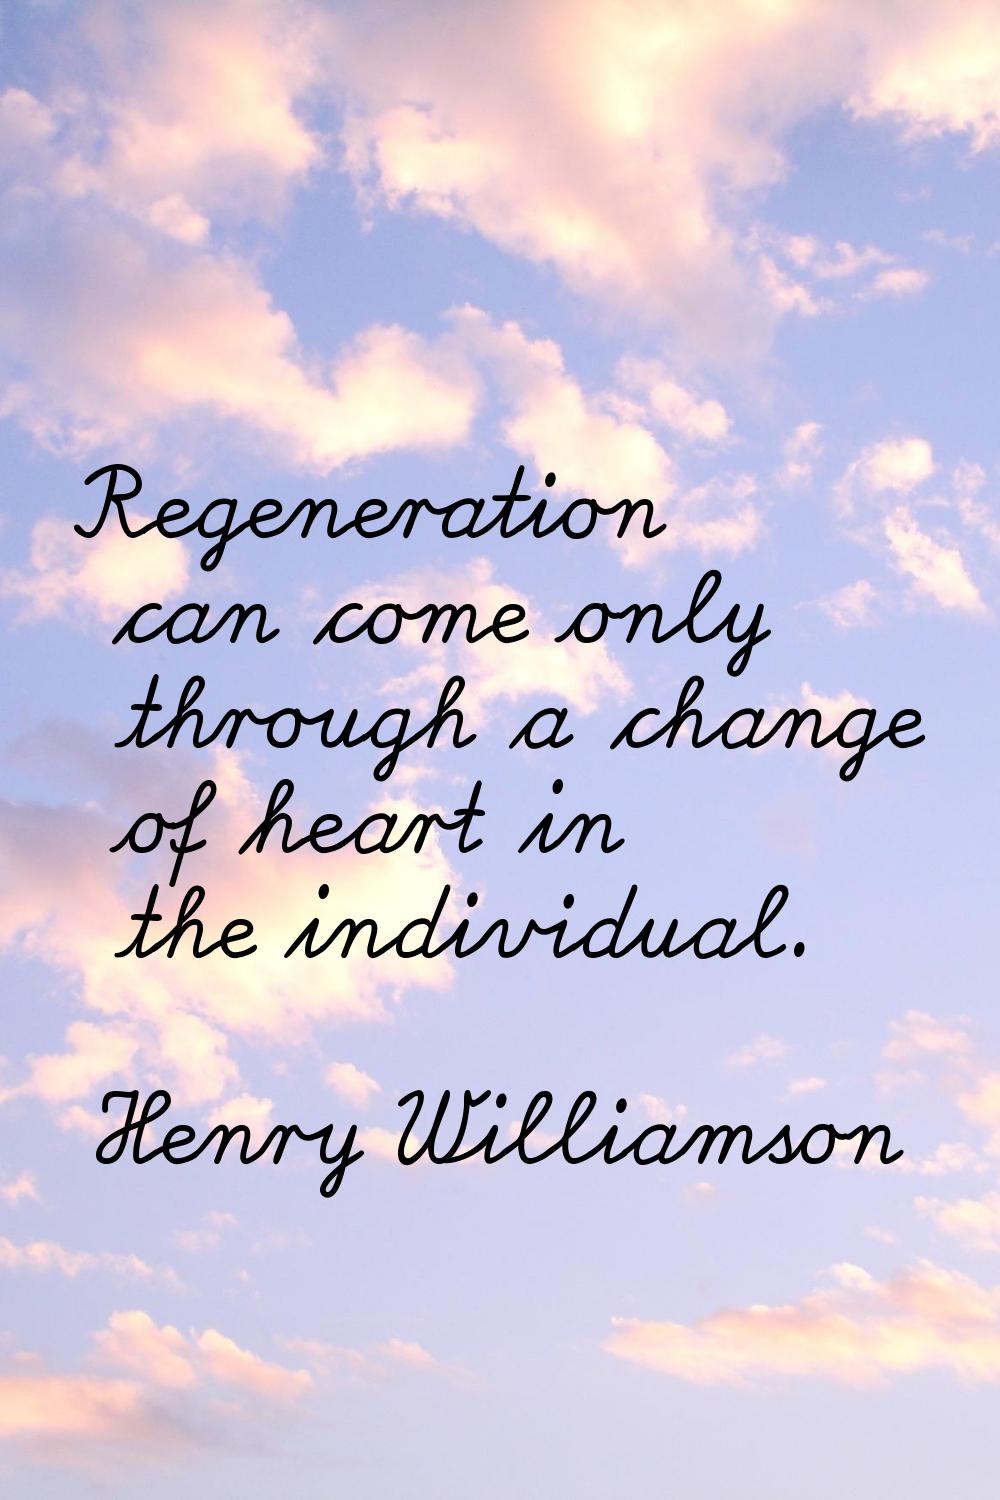 Regeneration can come only through a change of heart in the individual.